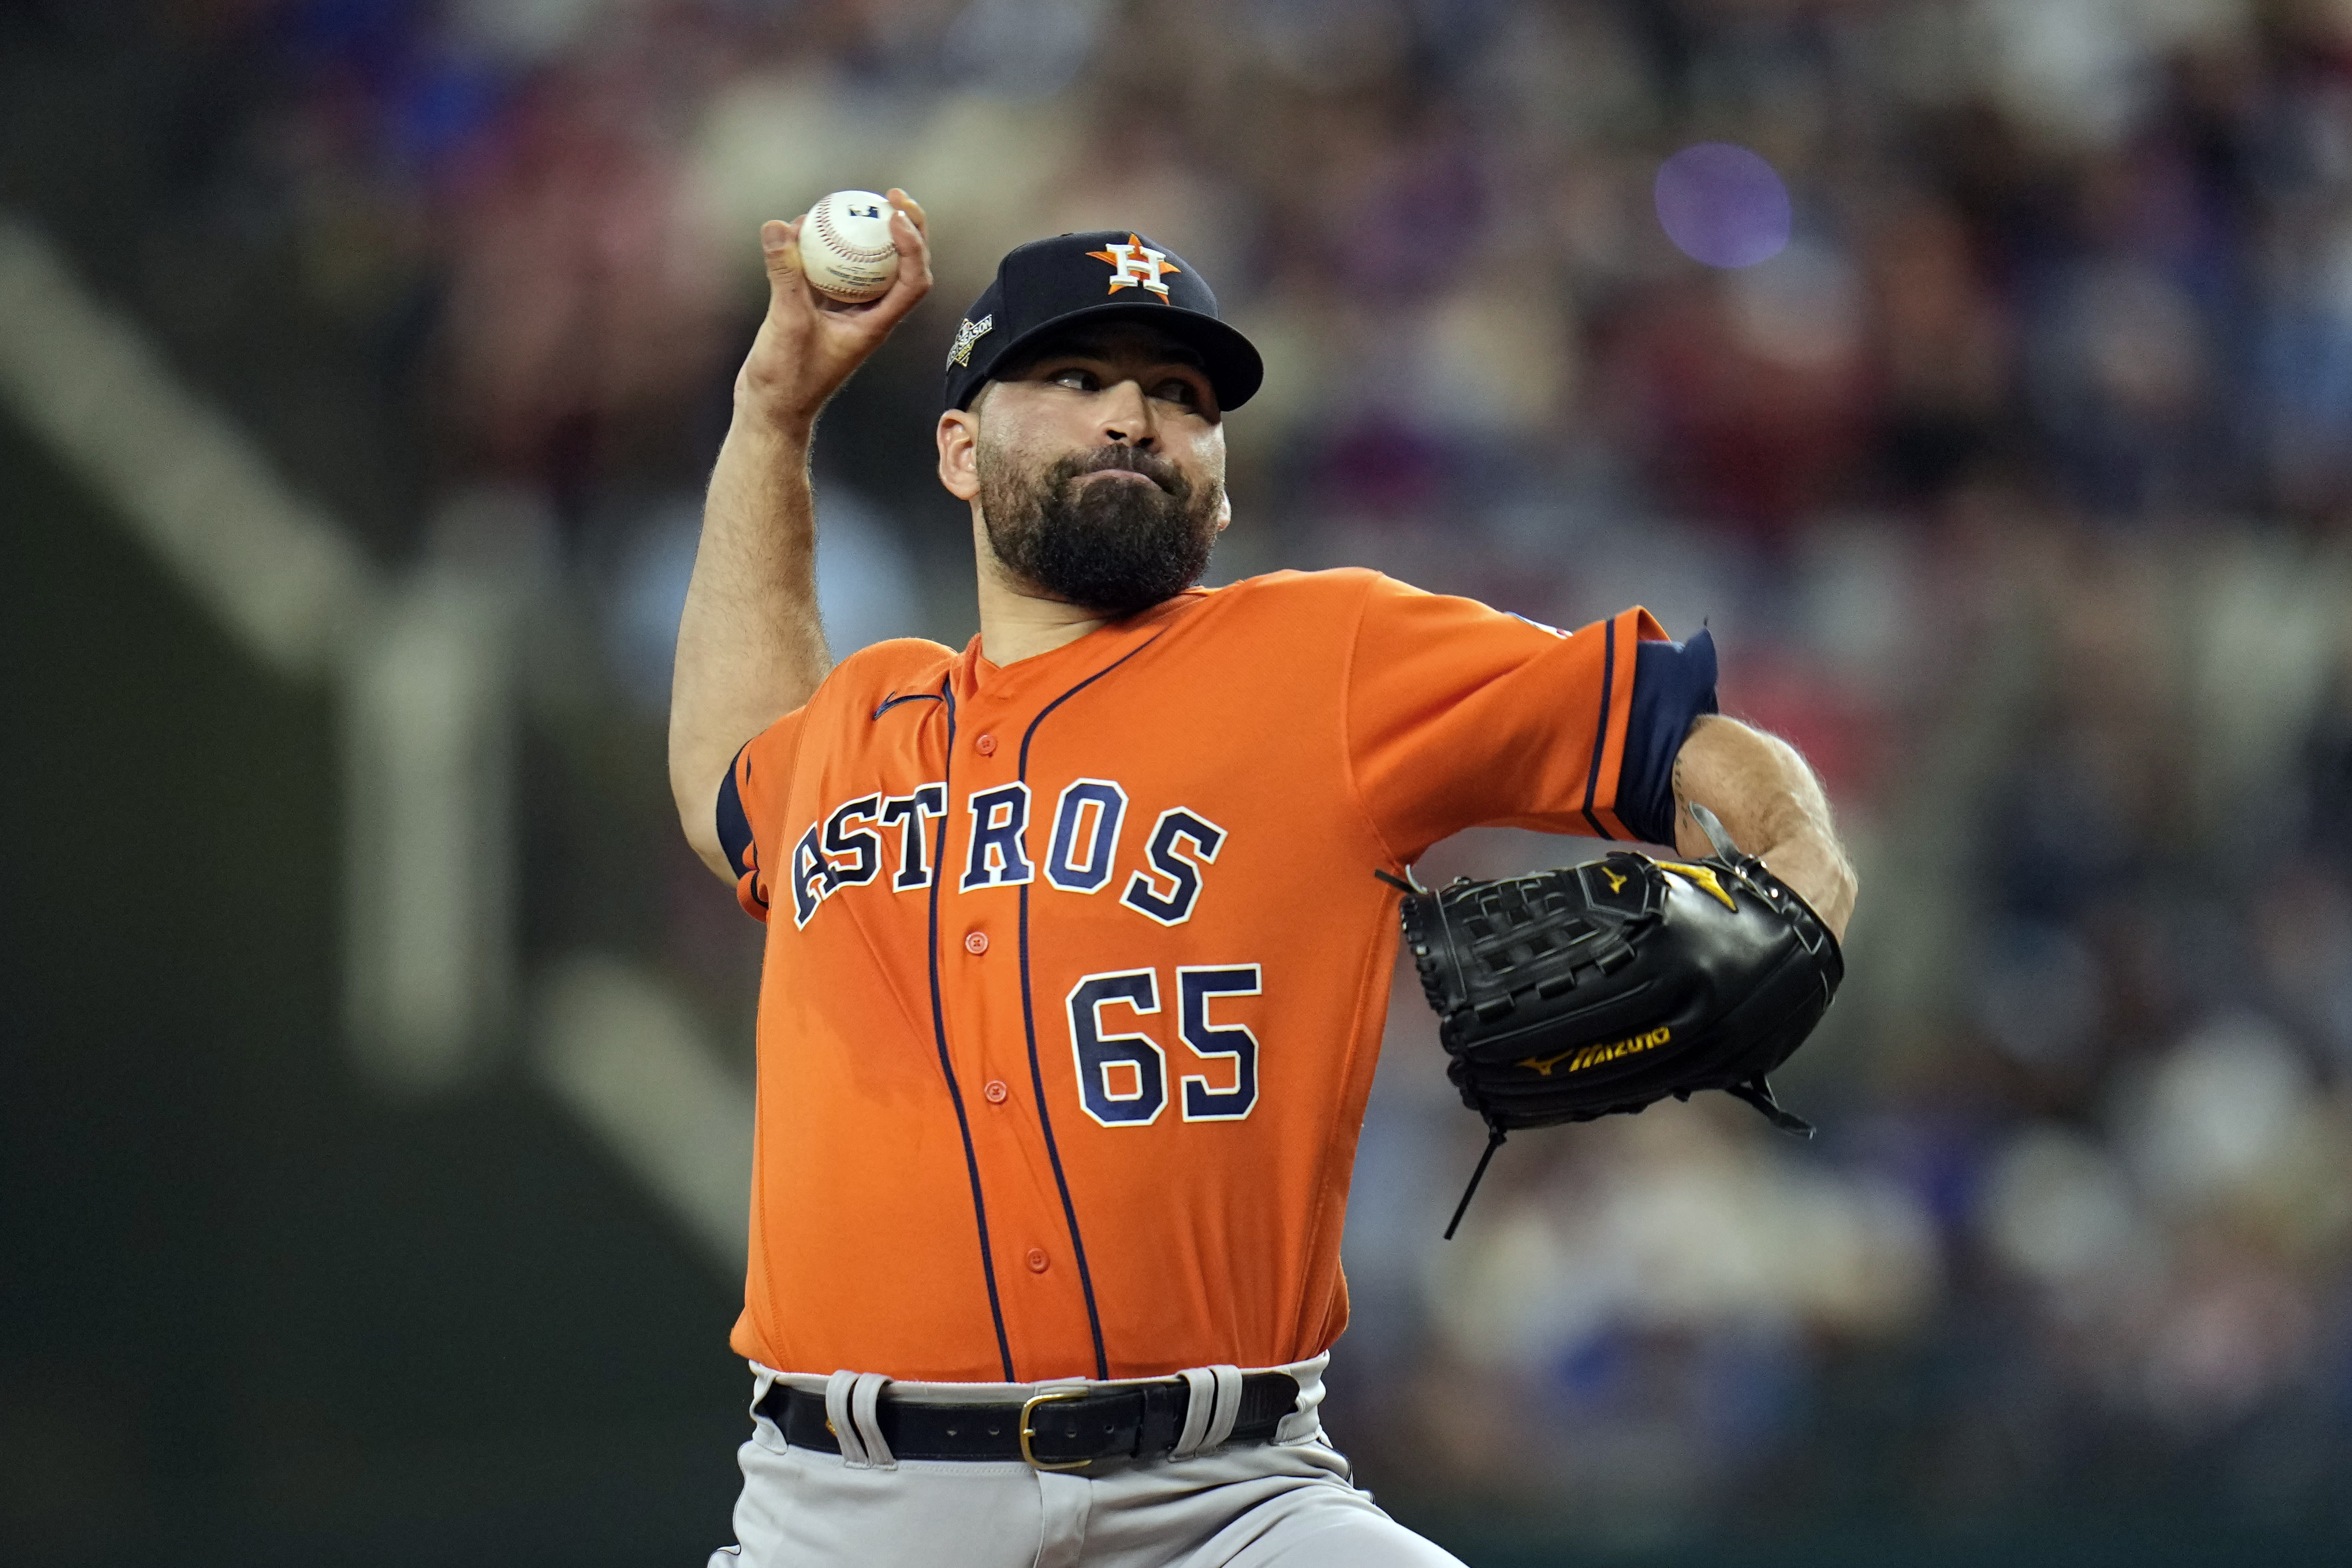 Report: Astros pitcher Jose Urquidy expected to undergo Tommy John surgery